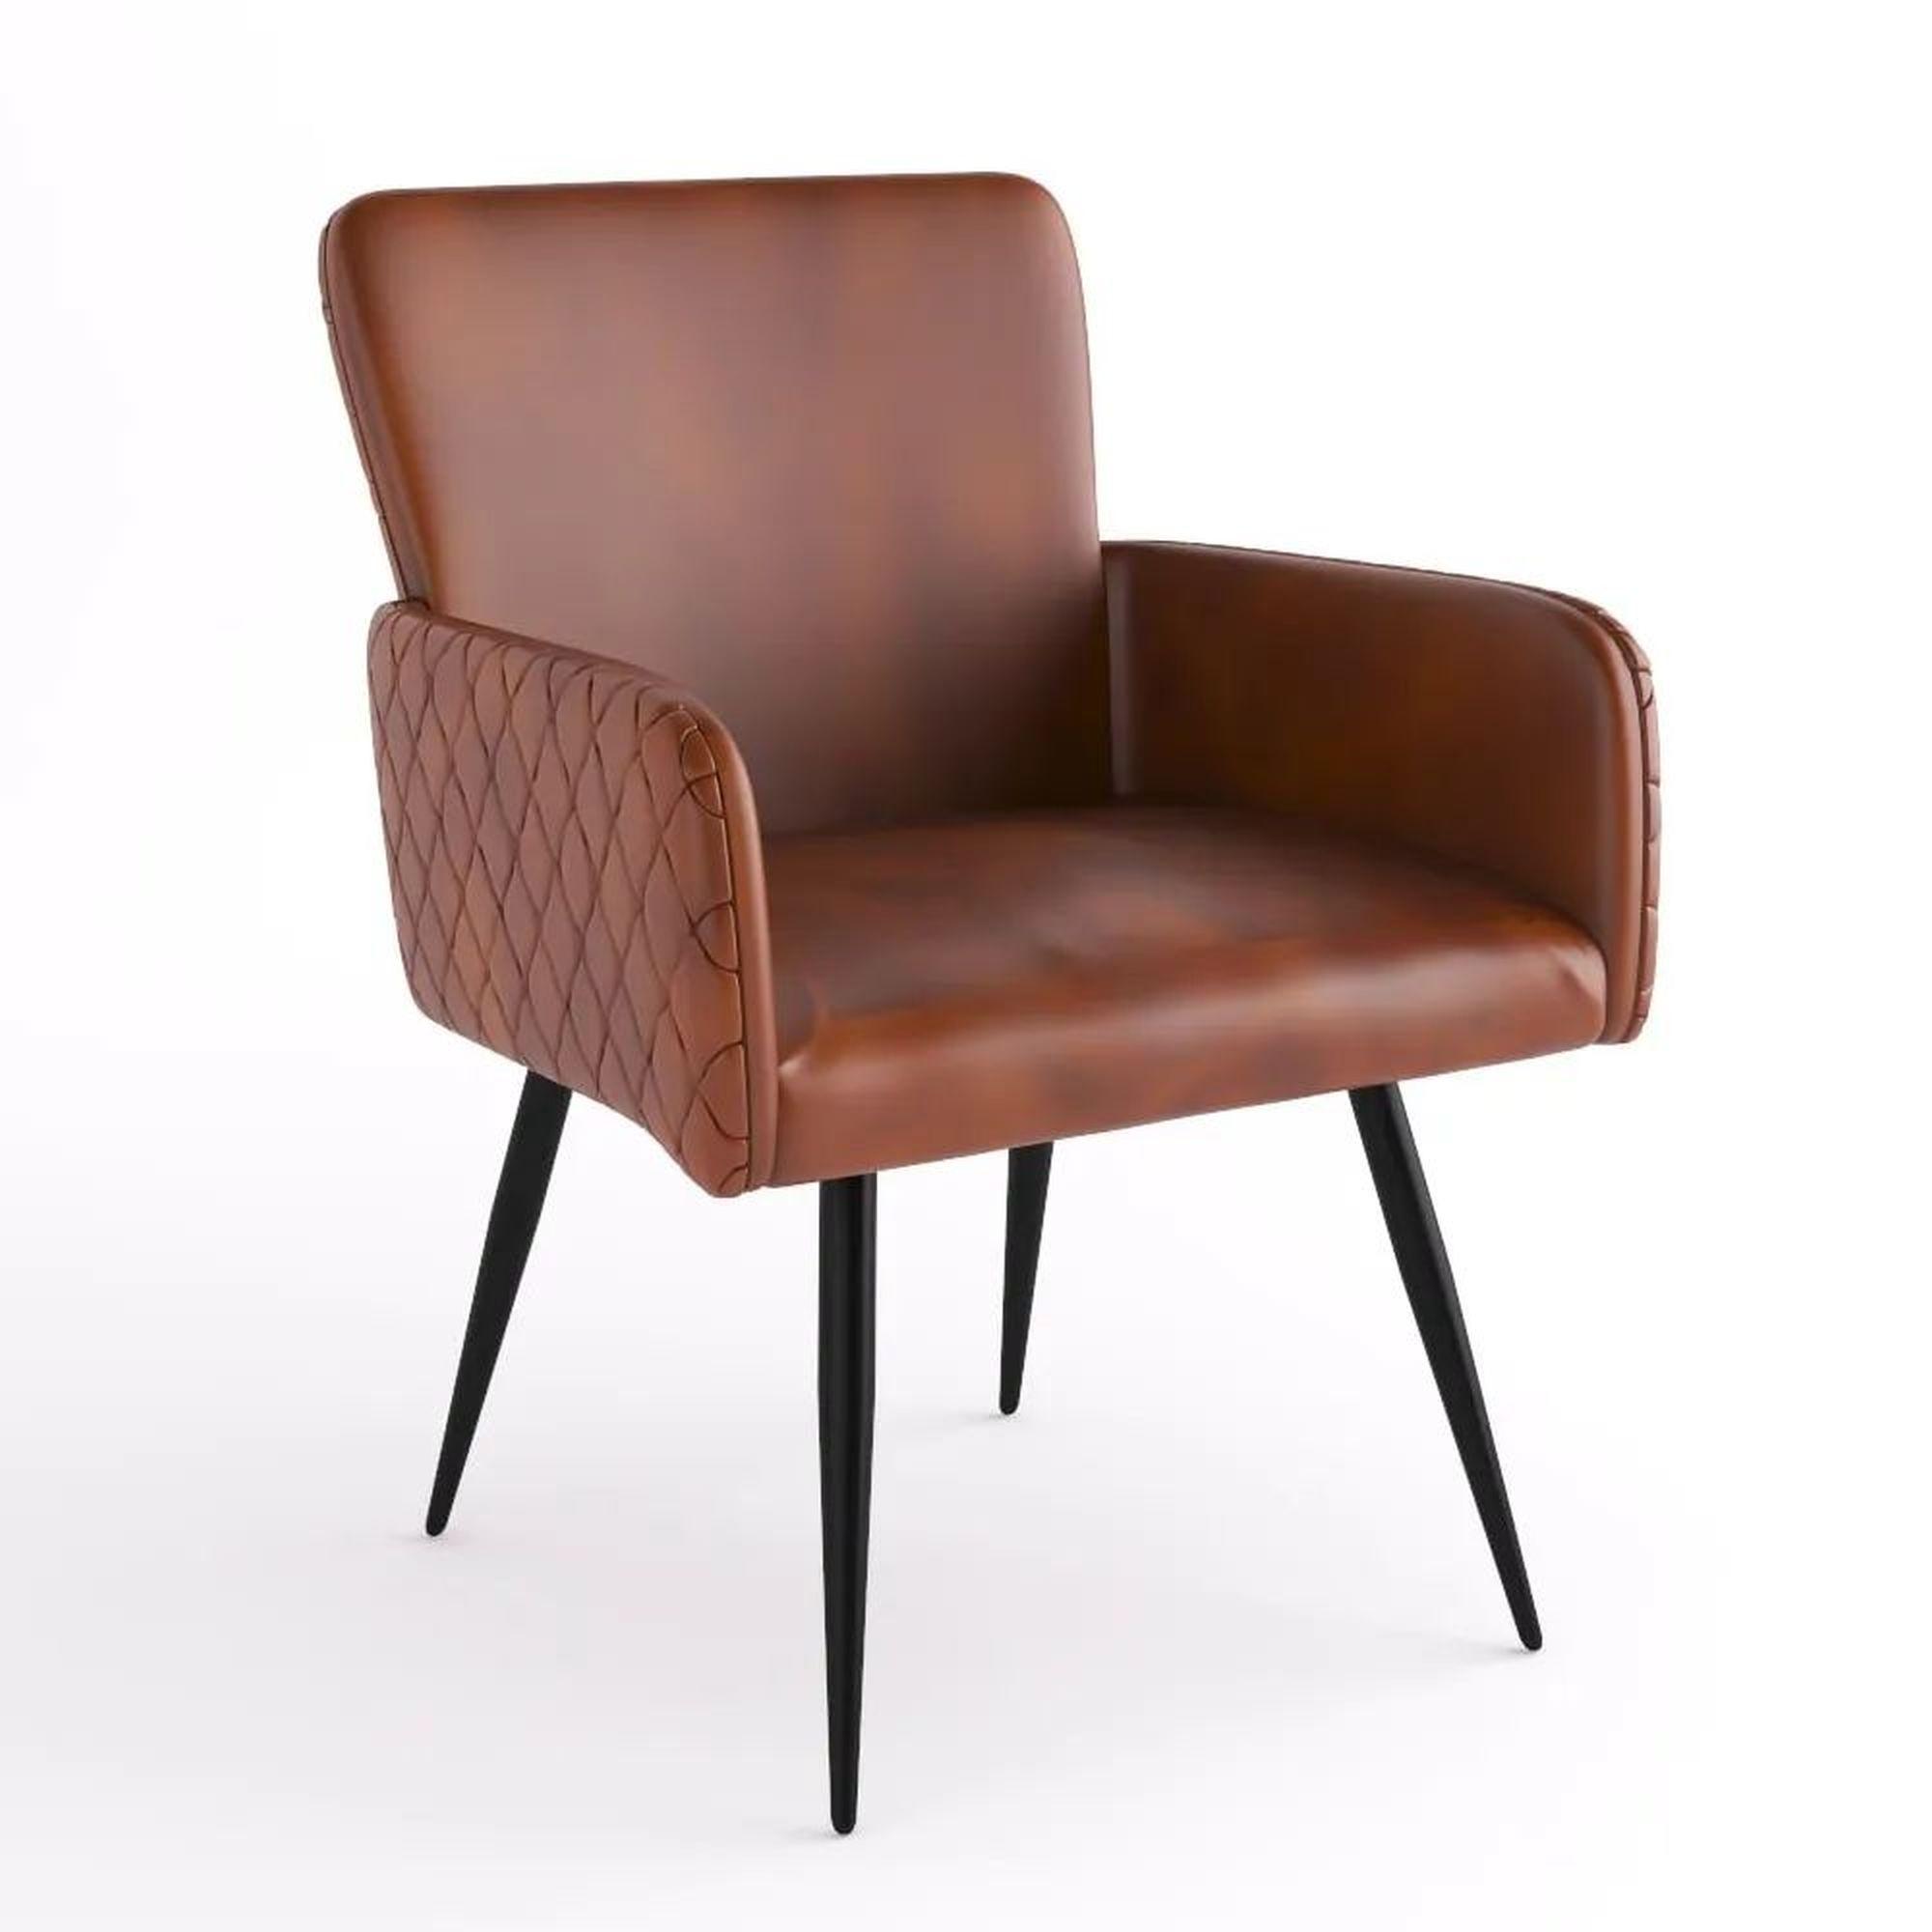 Stanton Brown Dining Armchair, Genuine Leather with Metal Legs (Sold in Pairs)